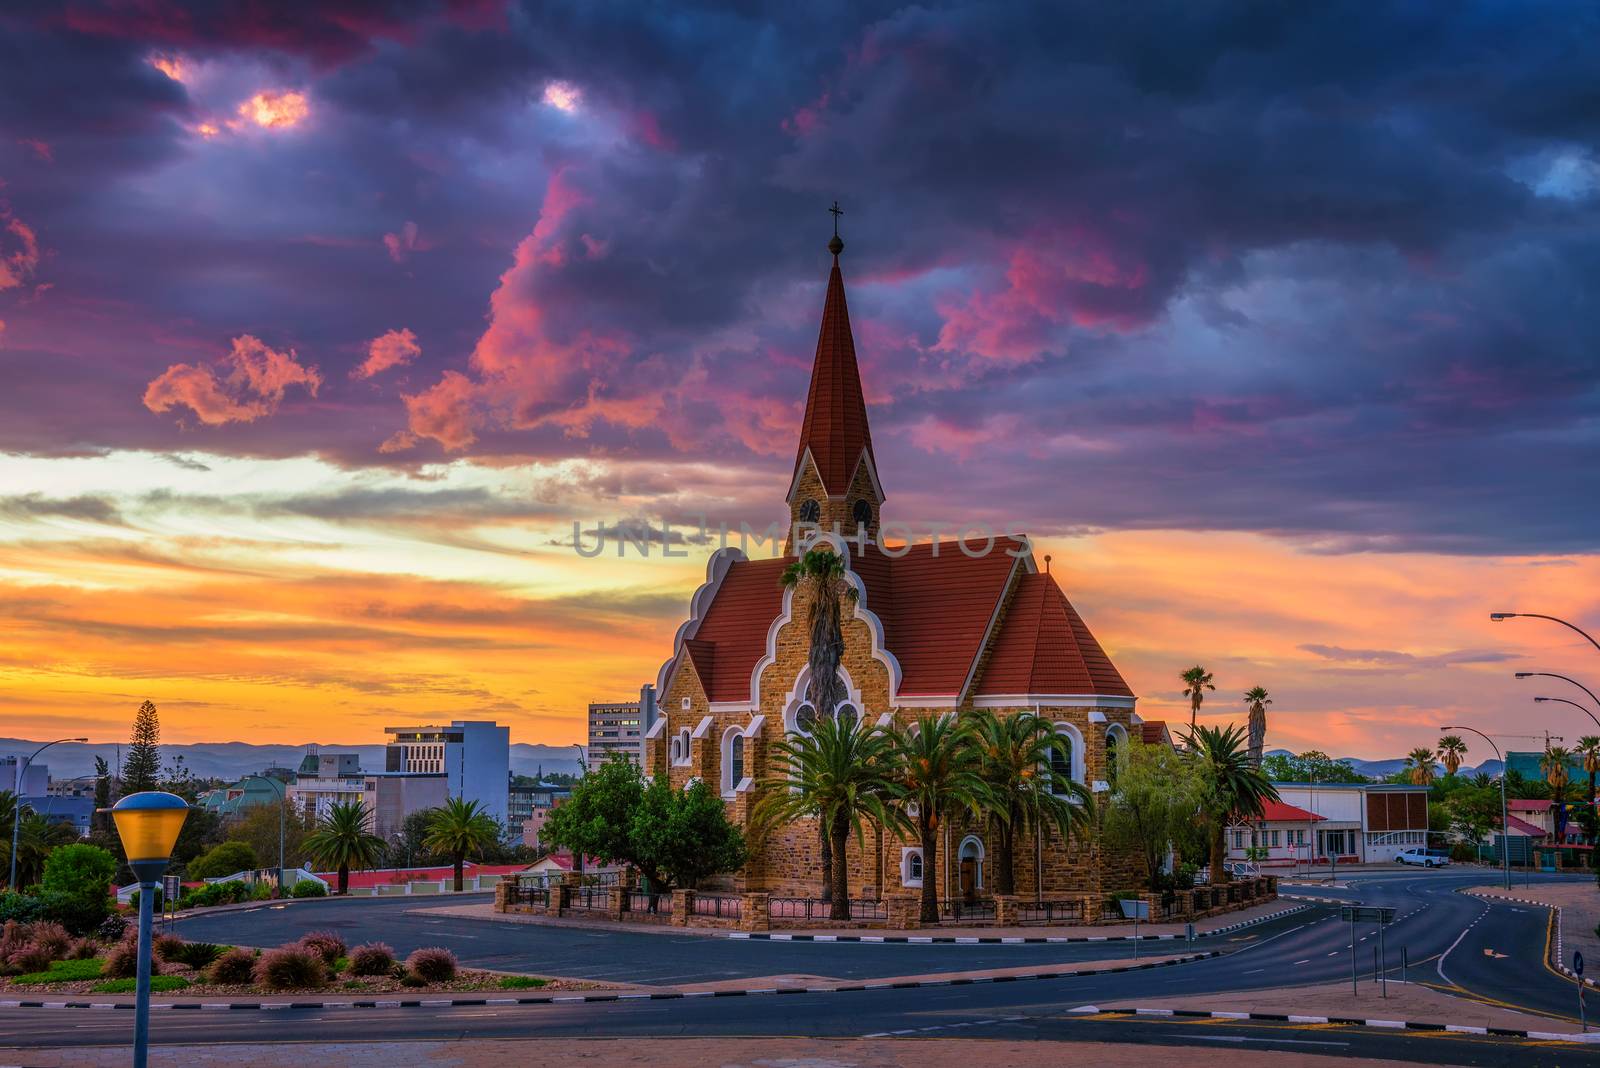 Dramatic sunset above Christchurch, Windhoek, Namibia by nickfox